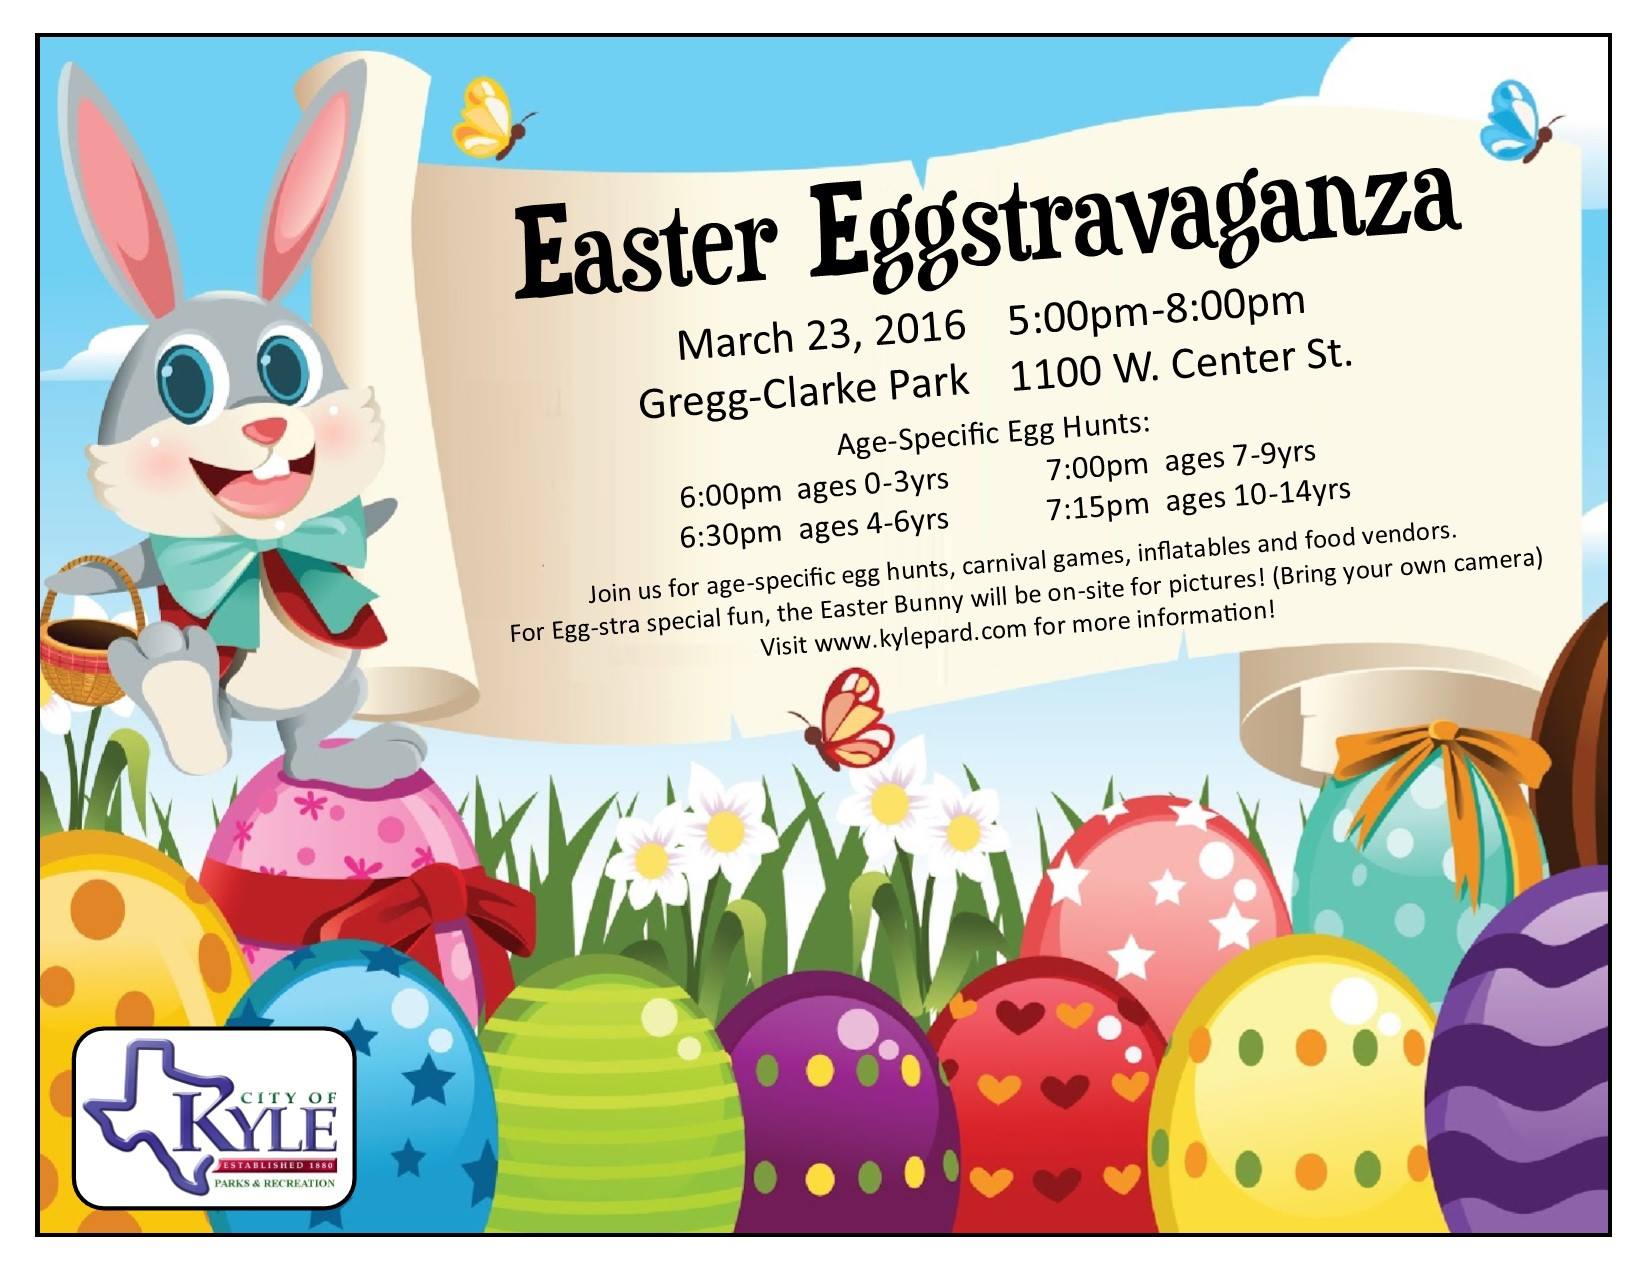 City of Kyle Easter Eggstravaganza 2016